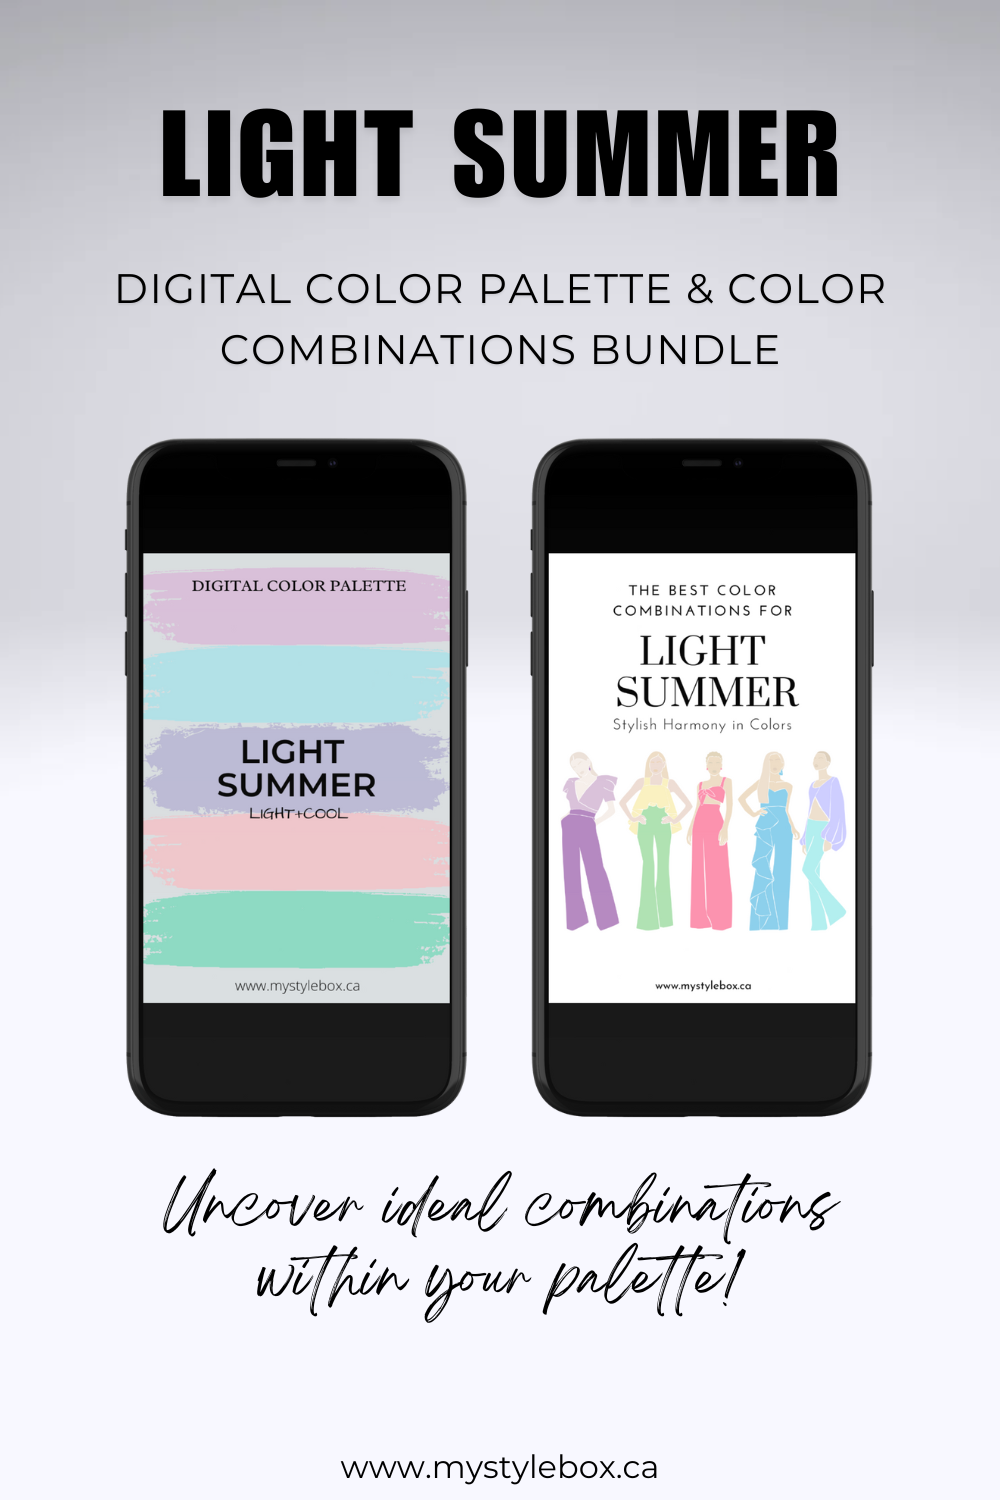 Light Summer Digital Color Palette and Color Combinations